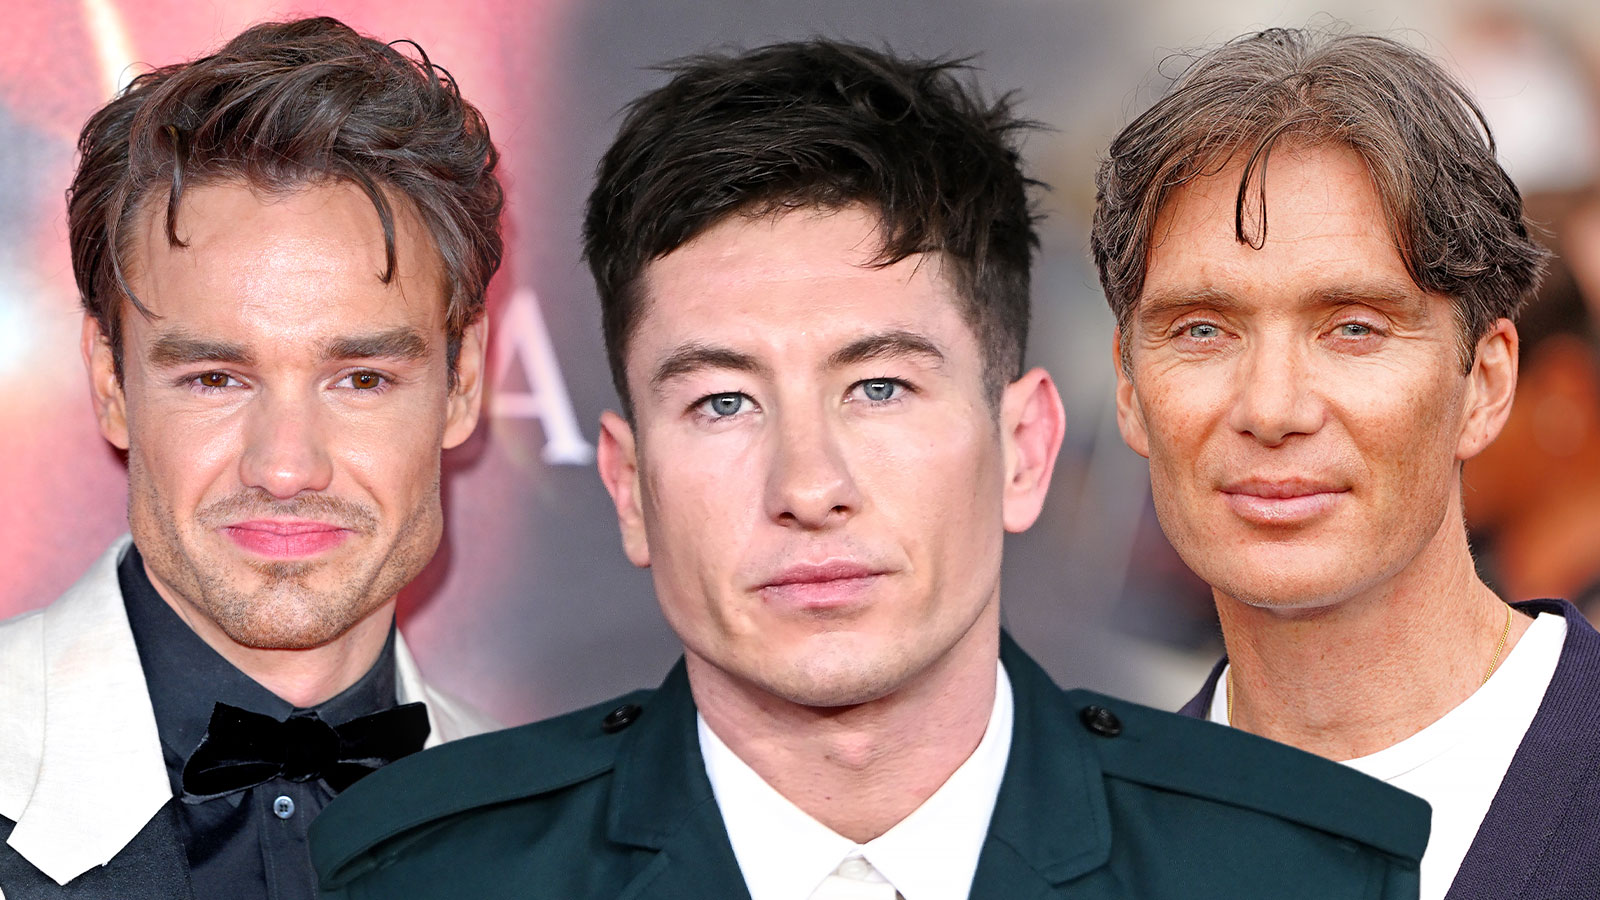 Liam Payne, Barry Keoghan and the Oscar-winning actor Cillian Murphy have all opted for tweakments